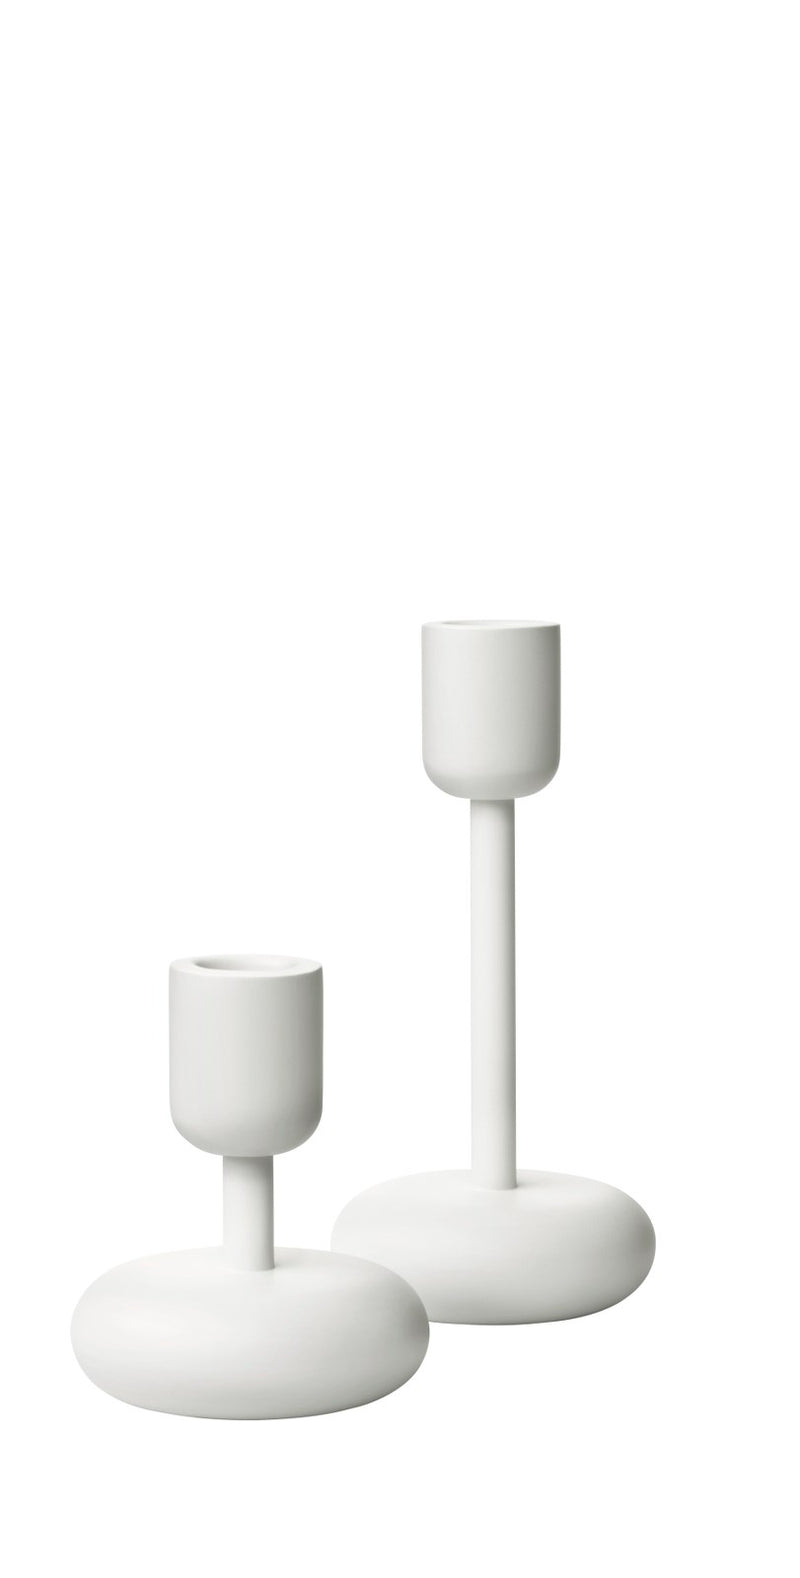 media image for Nappula Candleholder in Various Sizes & Colors design by Matti Klenell for Iittala 288